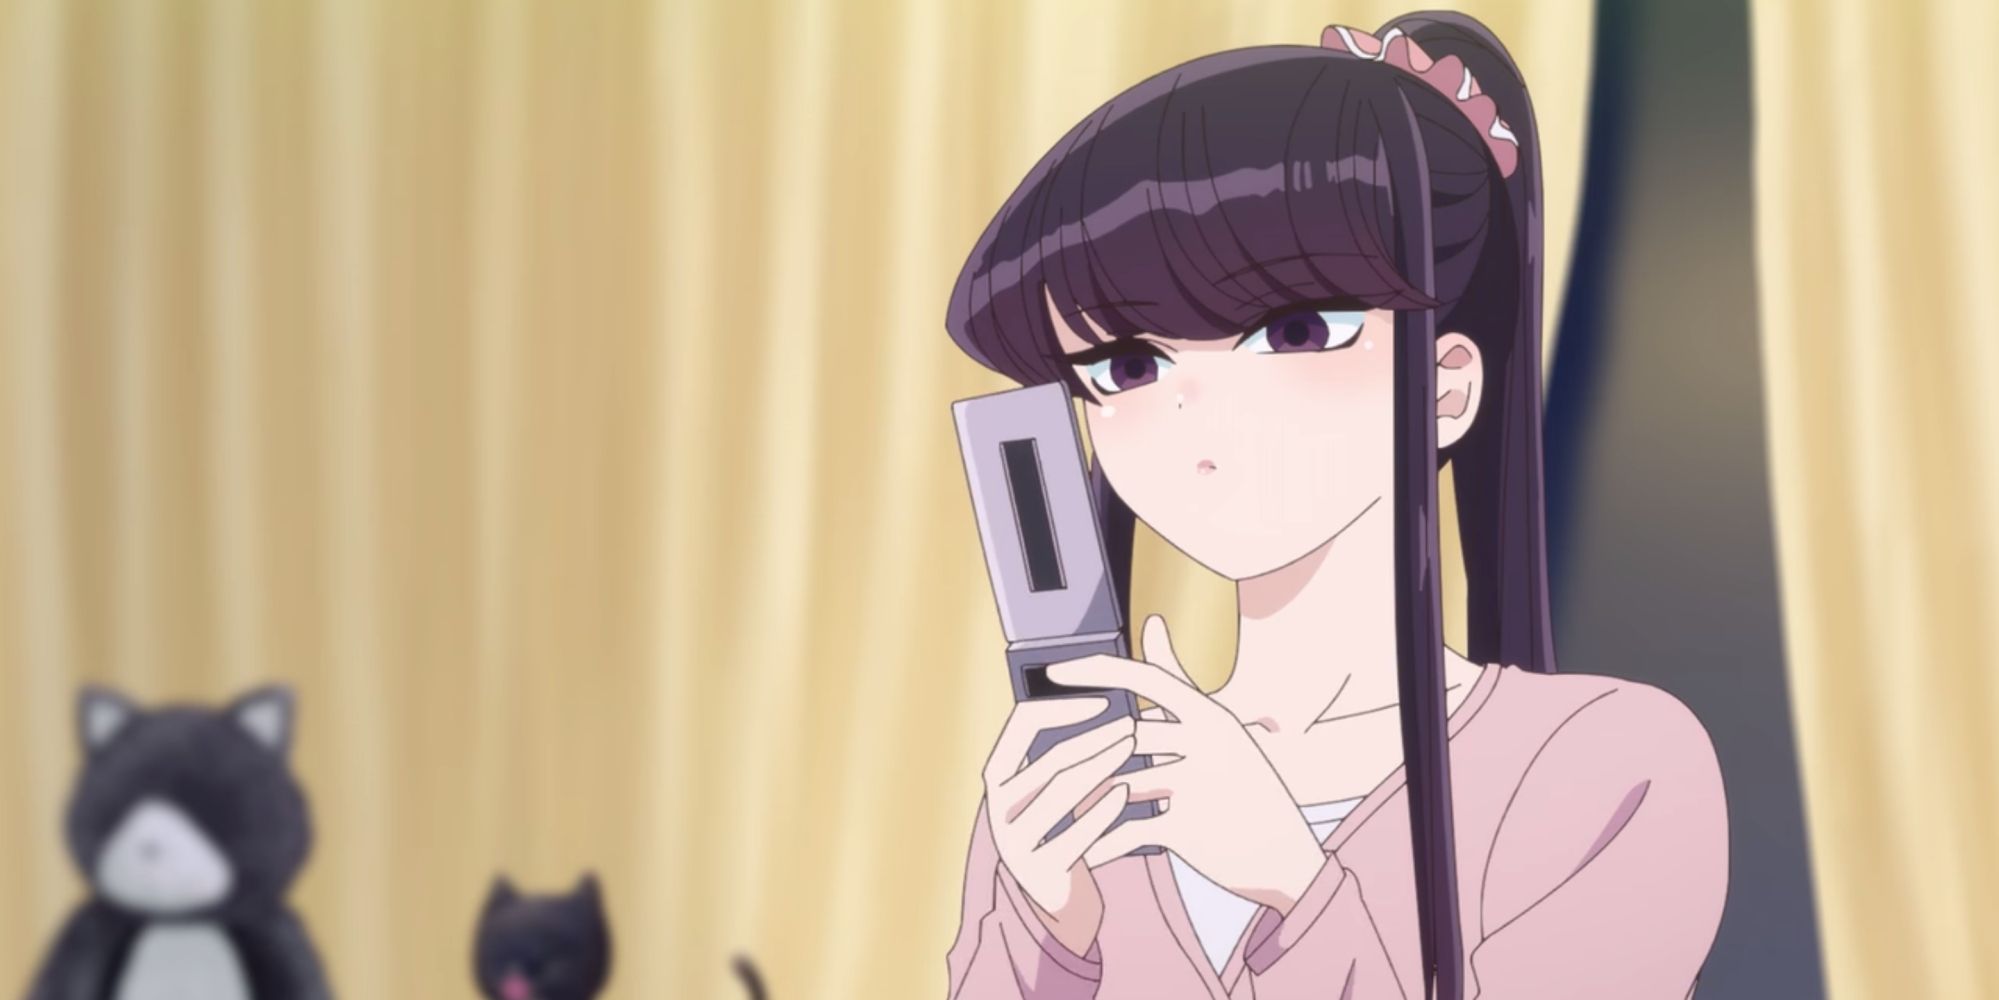 Komi checks out her new phone in Komi Can't Communicate.